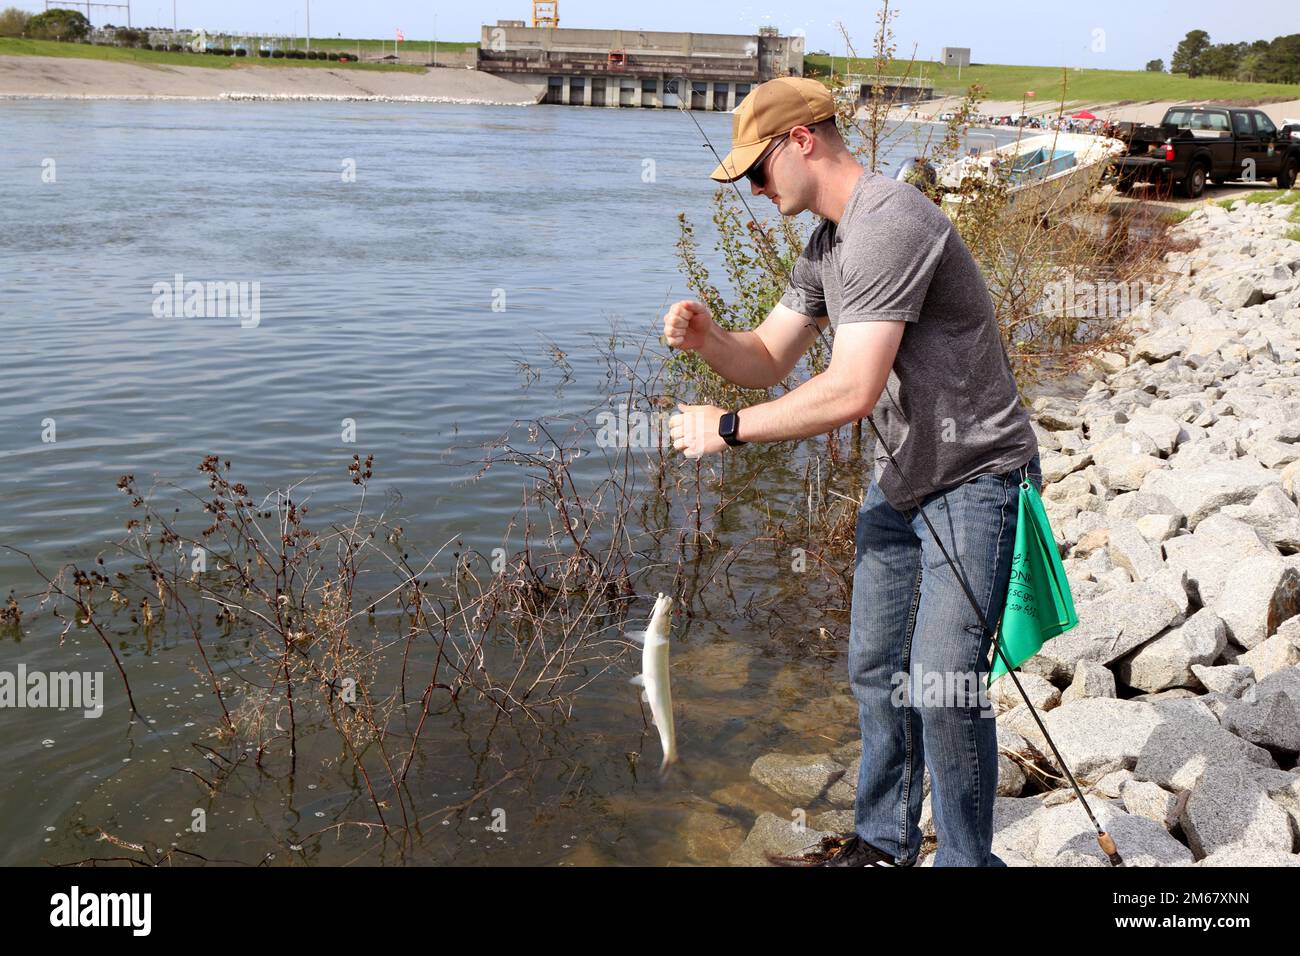 The U.S. Army Corps of Engineers, Charleston District, in partnership with the S.C. Department of Natural Resources, hosted the 8th Annual Wounded Warriors and Veterans fishing day at the Cooper River Rediversion Dam in St. Stephen. Stock Photo